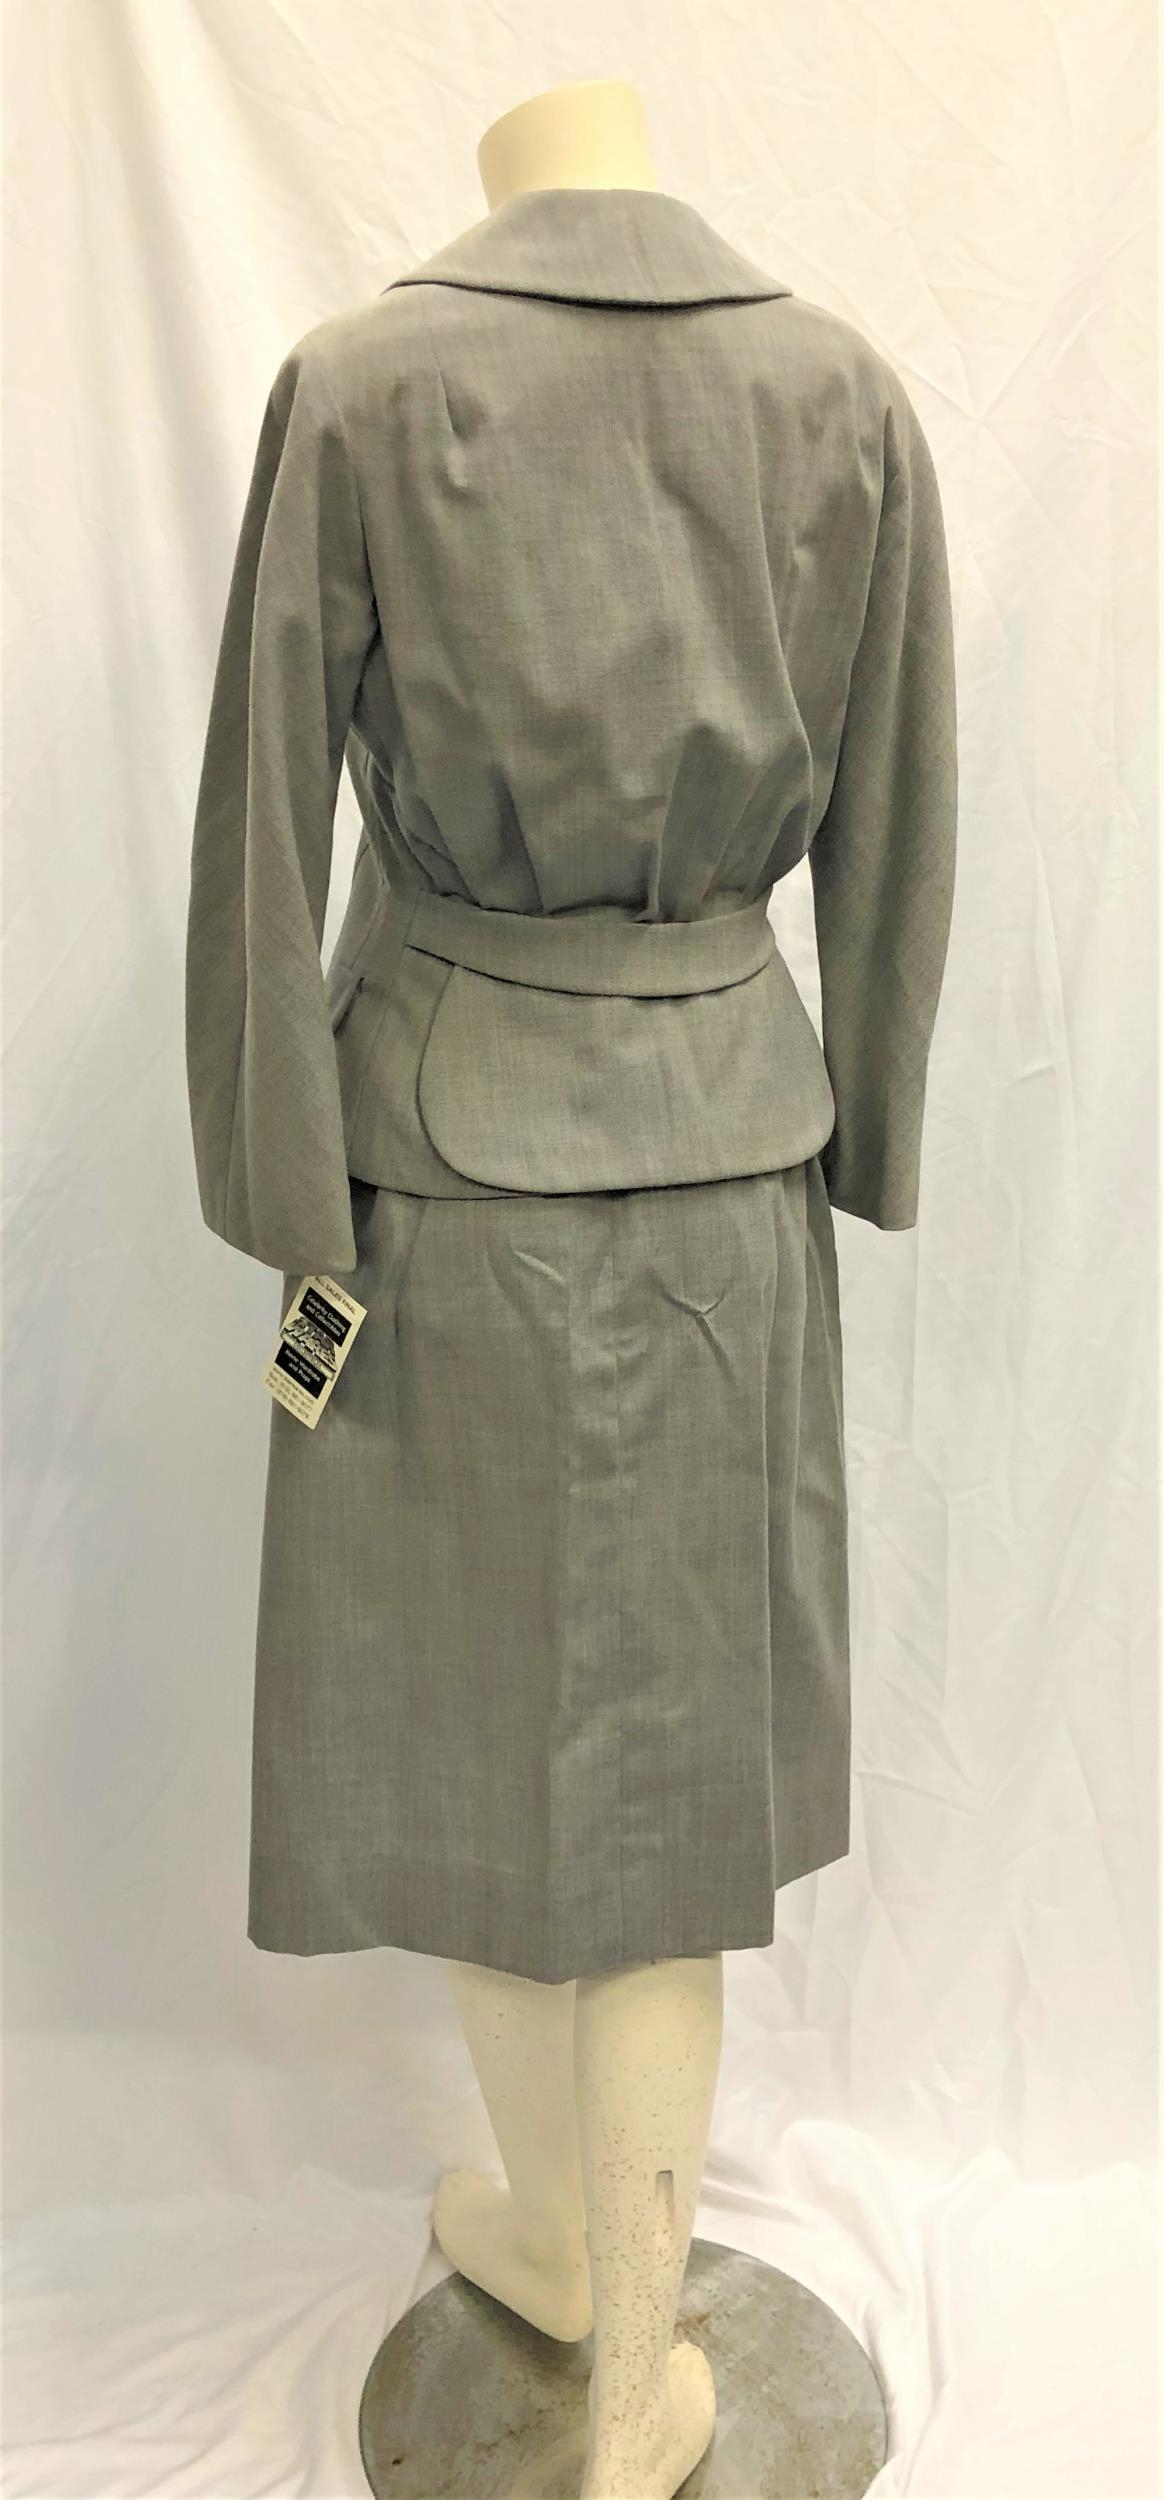 MARILYN MONROE OWNED SILK TWO PIECE GREY SUIT comprising handmade fitted skirt and jacket. - Image 2 of 4